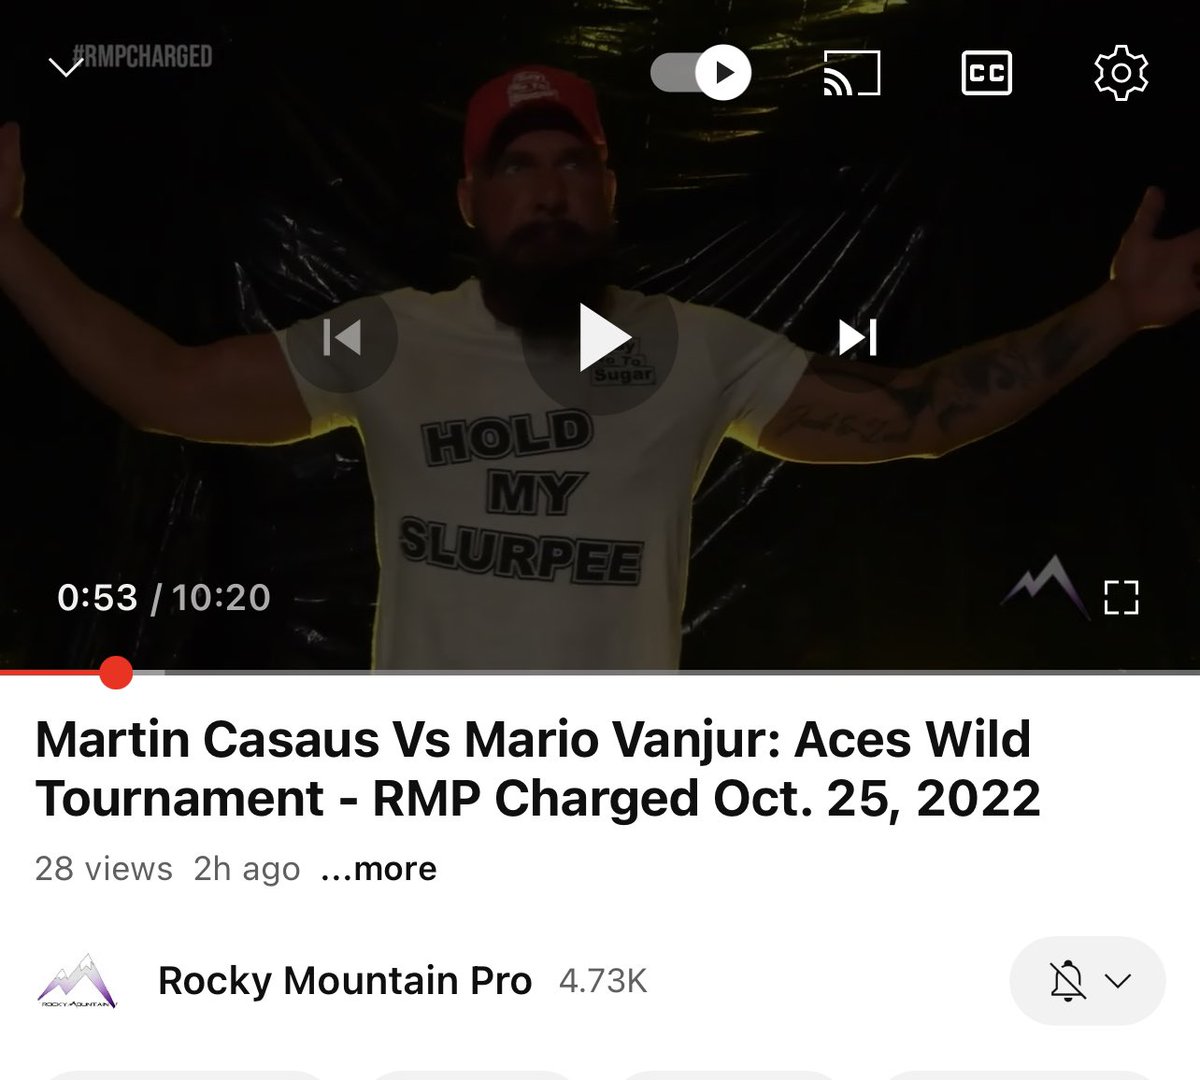 New match up on the @TheRockyMtnPro @YouTube! @dlobrown75 & @TheDangerDean on the call for @martincasaus v. Mario Vanjur.
youtu.be/jGMMYf9sF5o
#rmp #prowrestling #rmpcharged #wrestling #colorado